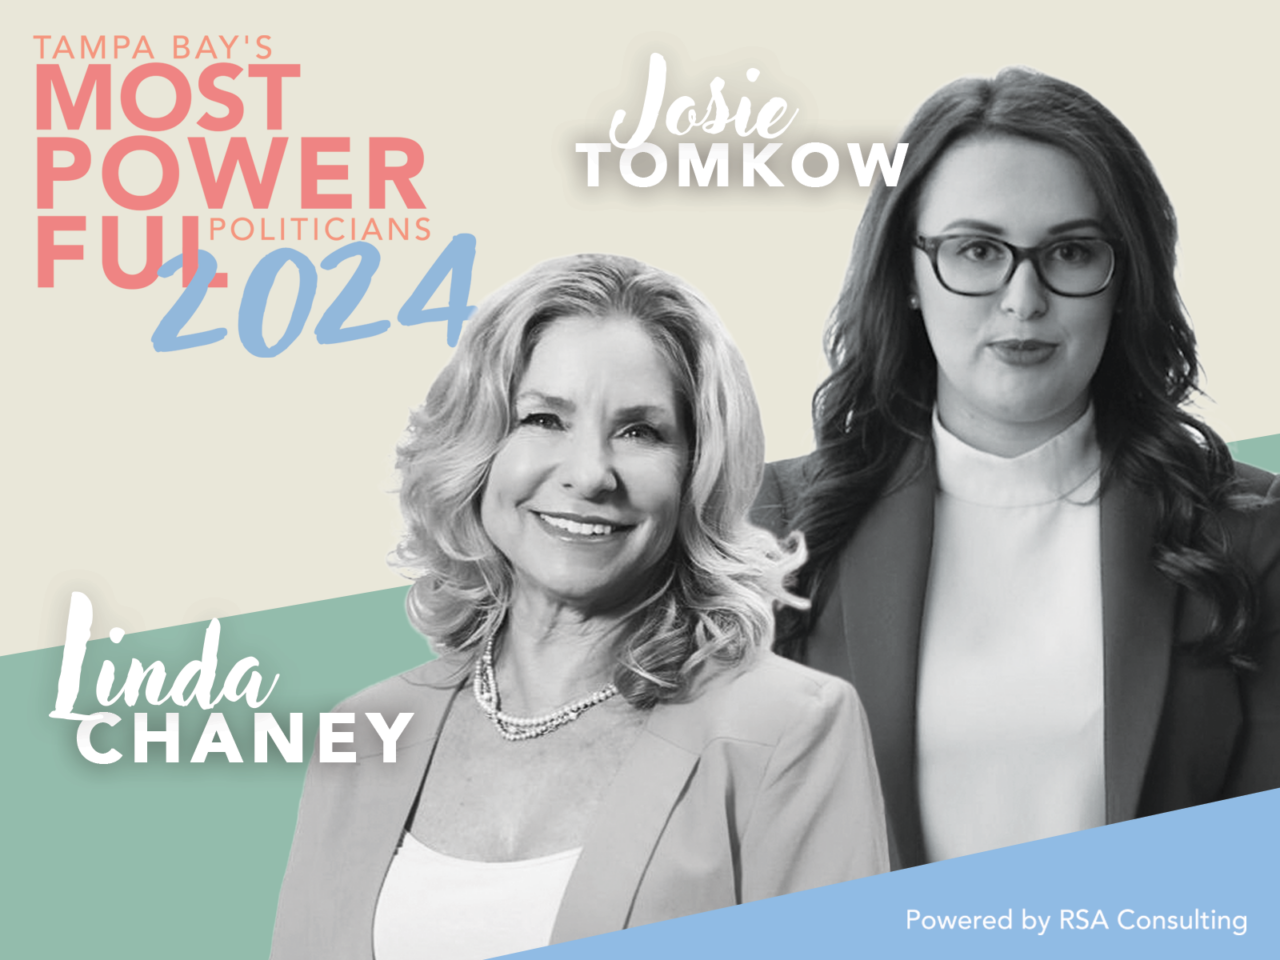 tampa bay's most powerful politicians - 2024 - chaney and tomkow